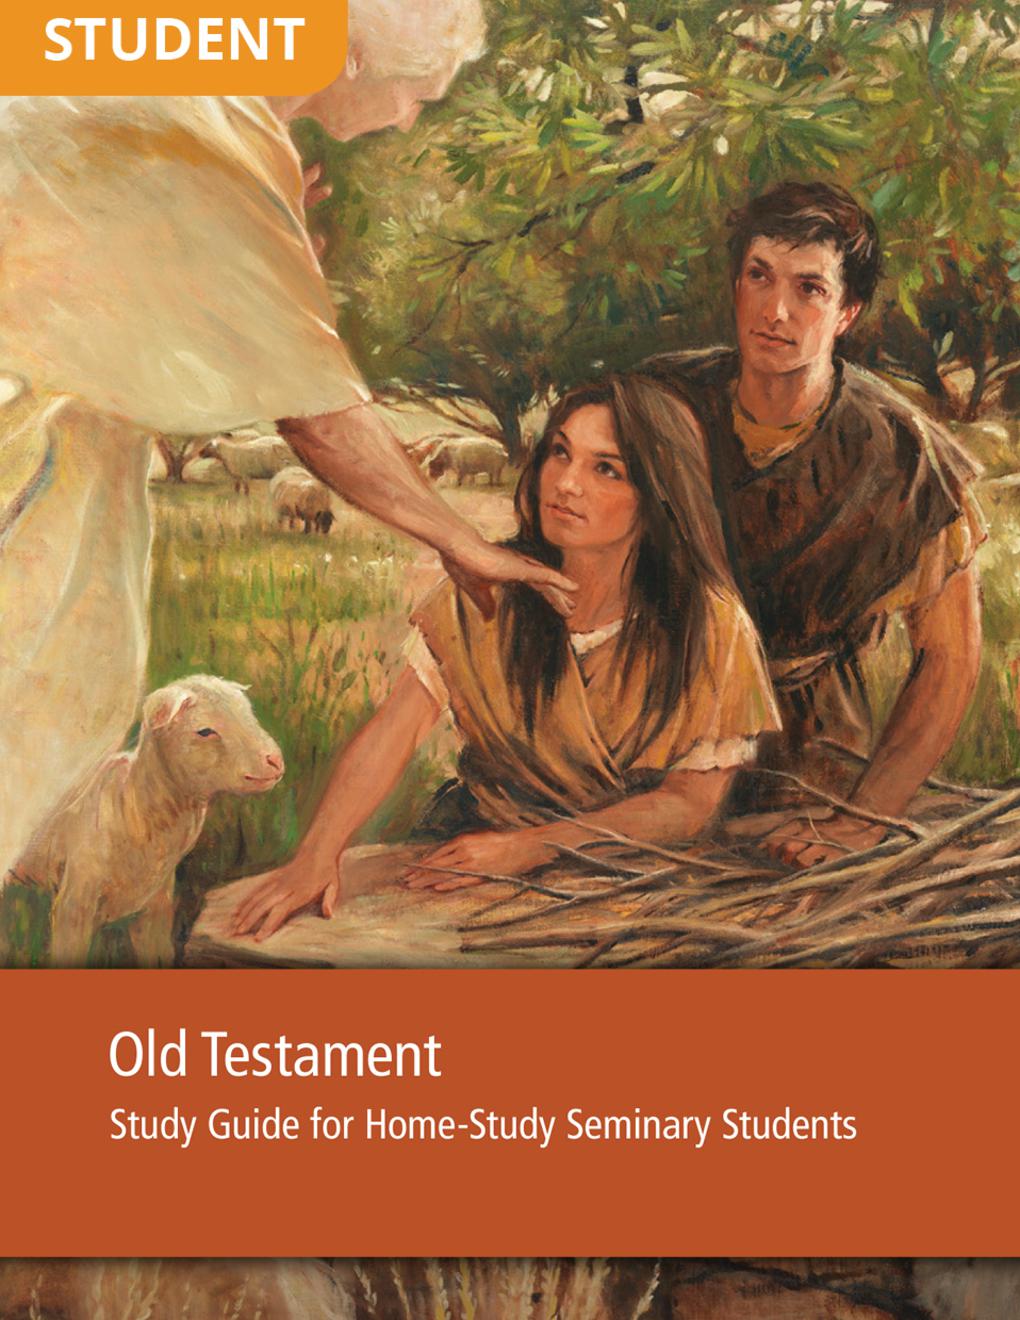 Old Testament Study Guide for Home-Study Seminary Students